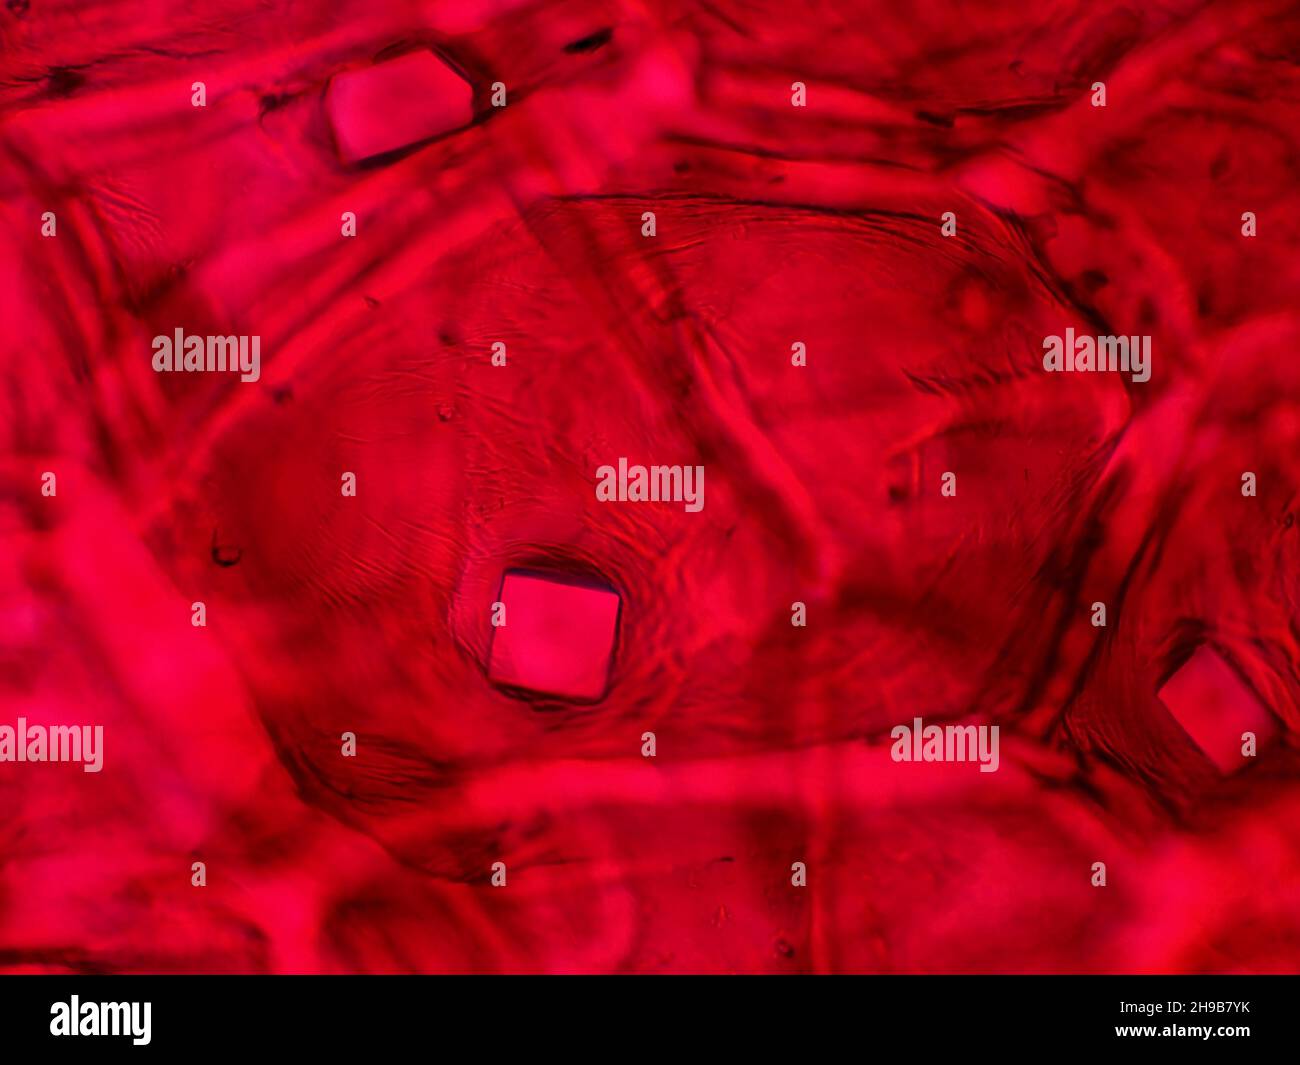 Red onion skin with oxalate crystals under the microscope, horizontal field of view is about 0.24mm Stock Photo